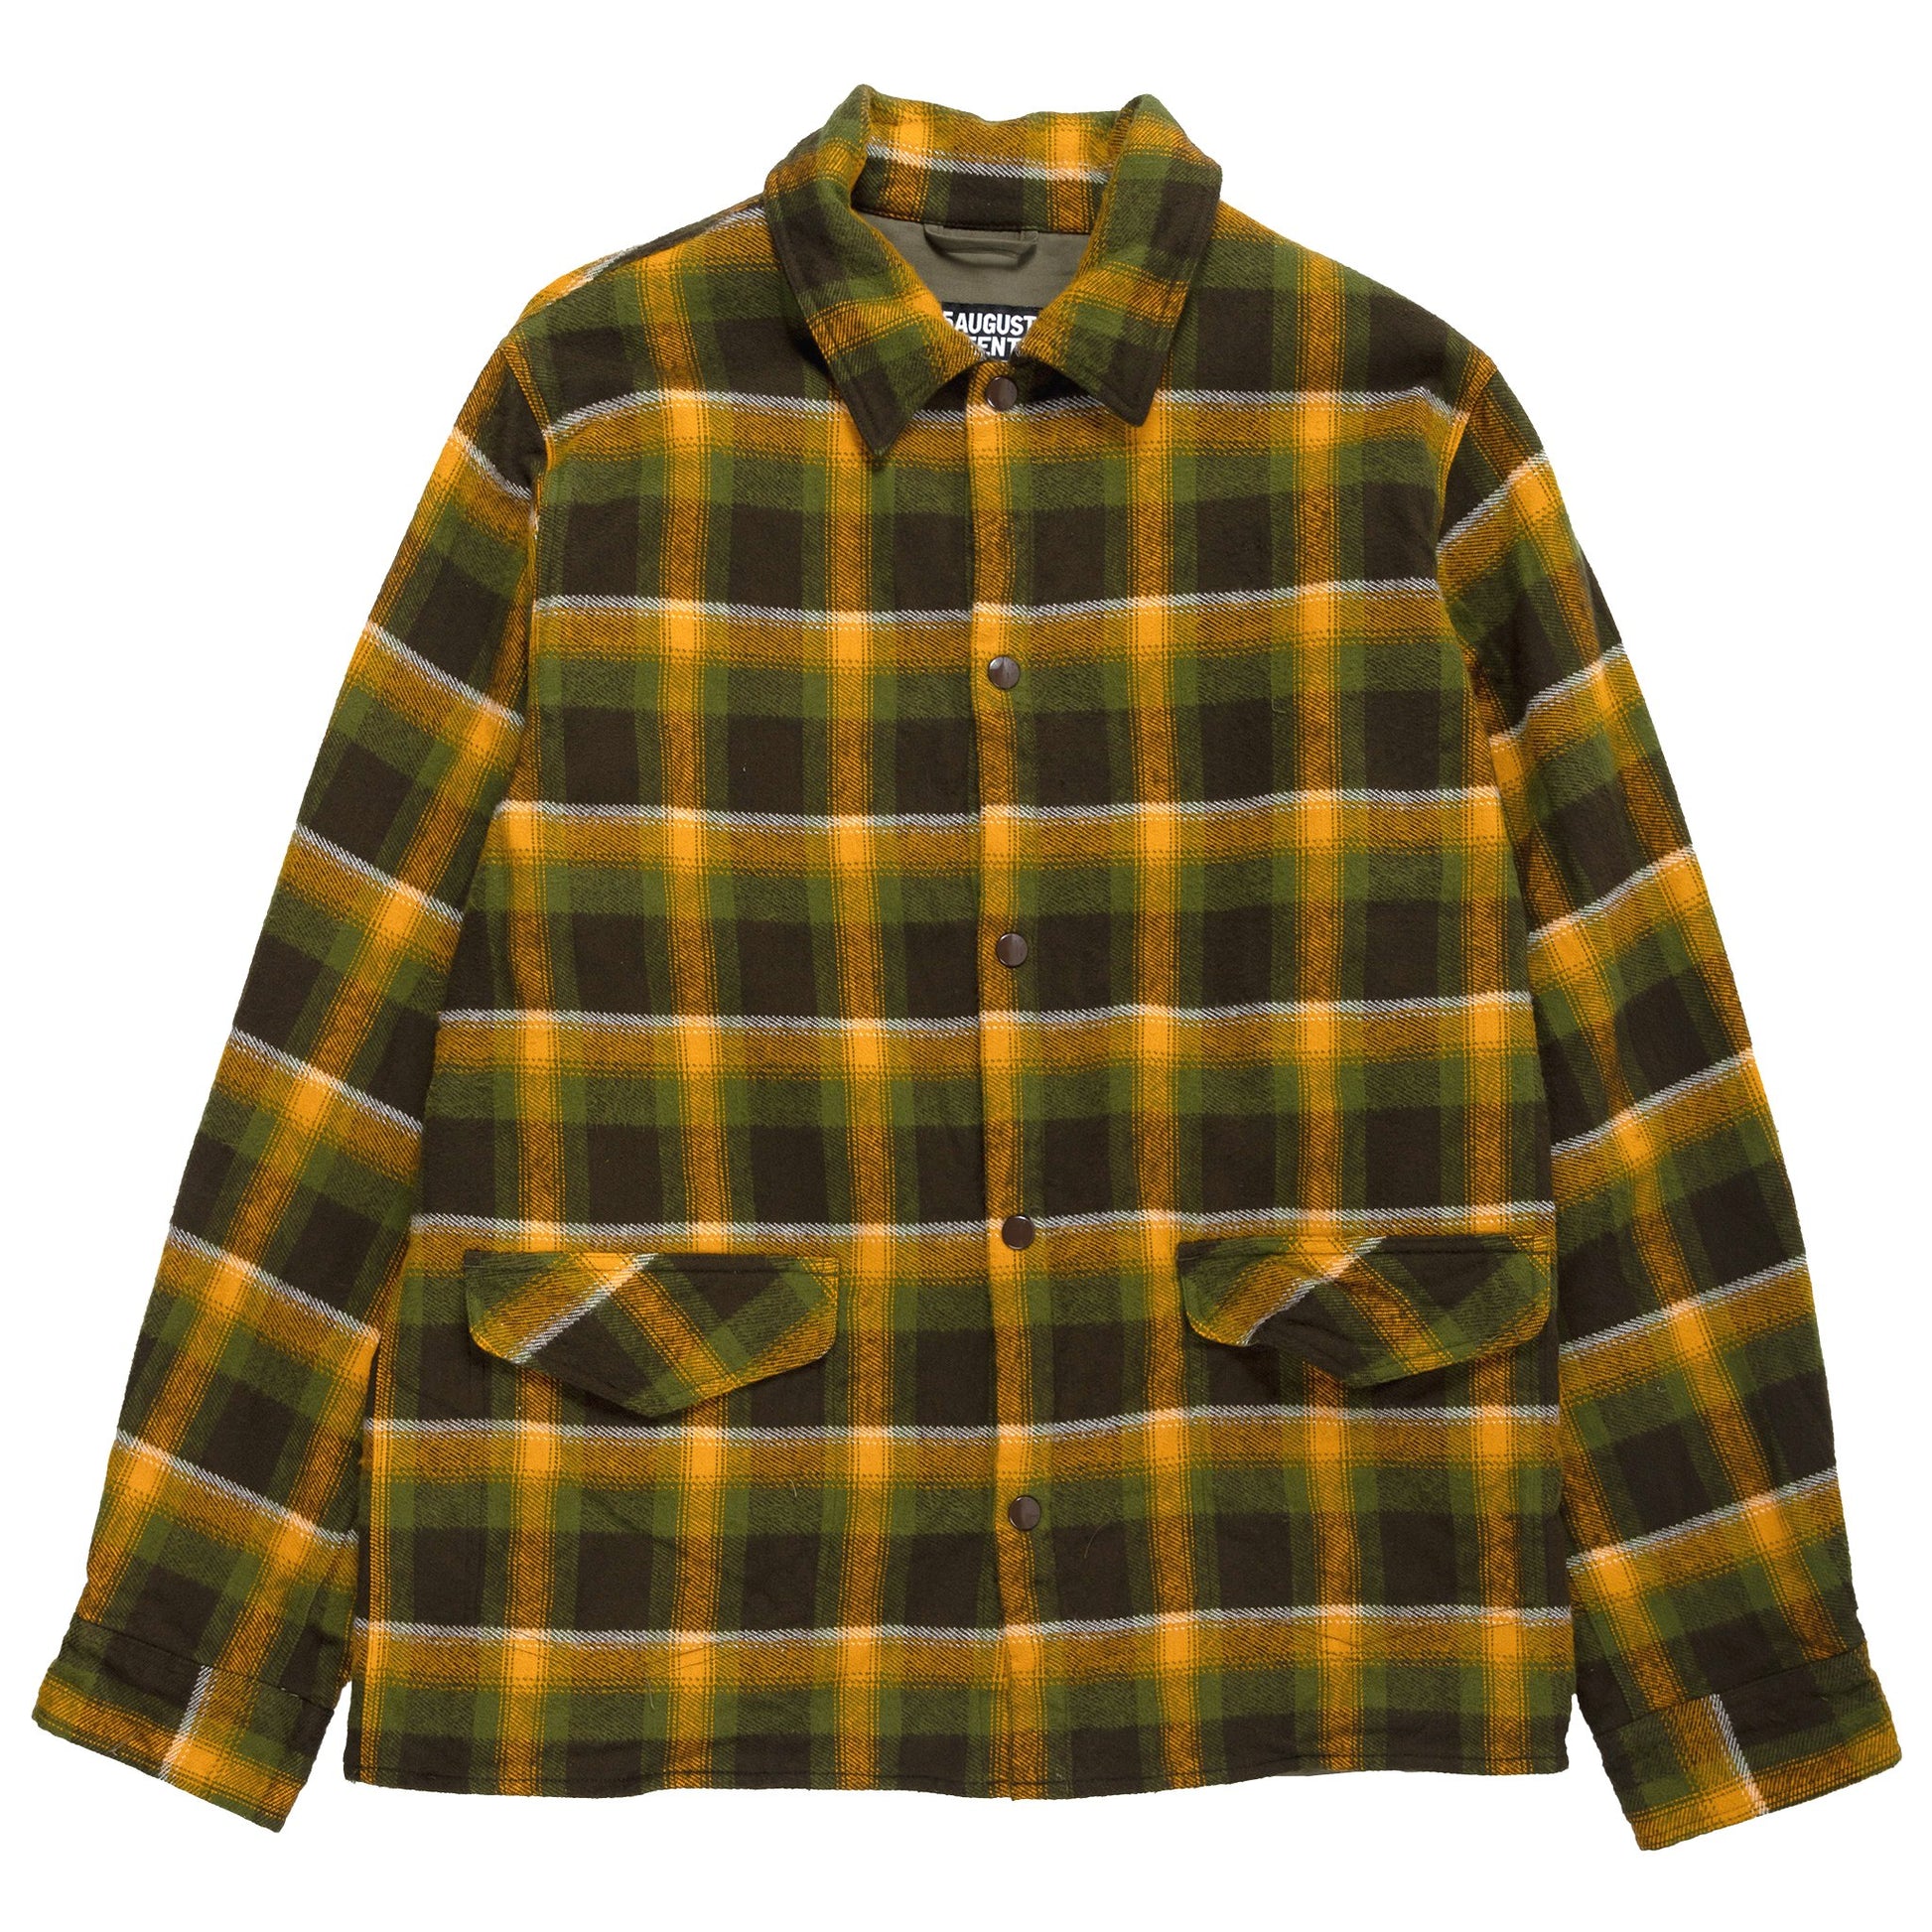 August Fifteenth Vermont Jacket Plaid Green Brown Yellow Front